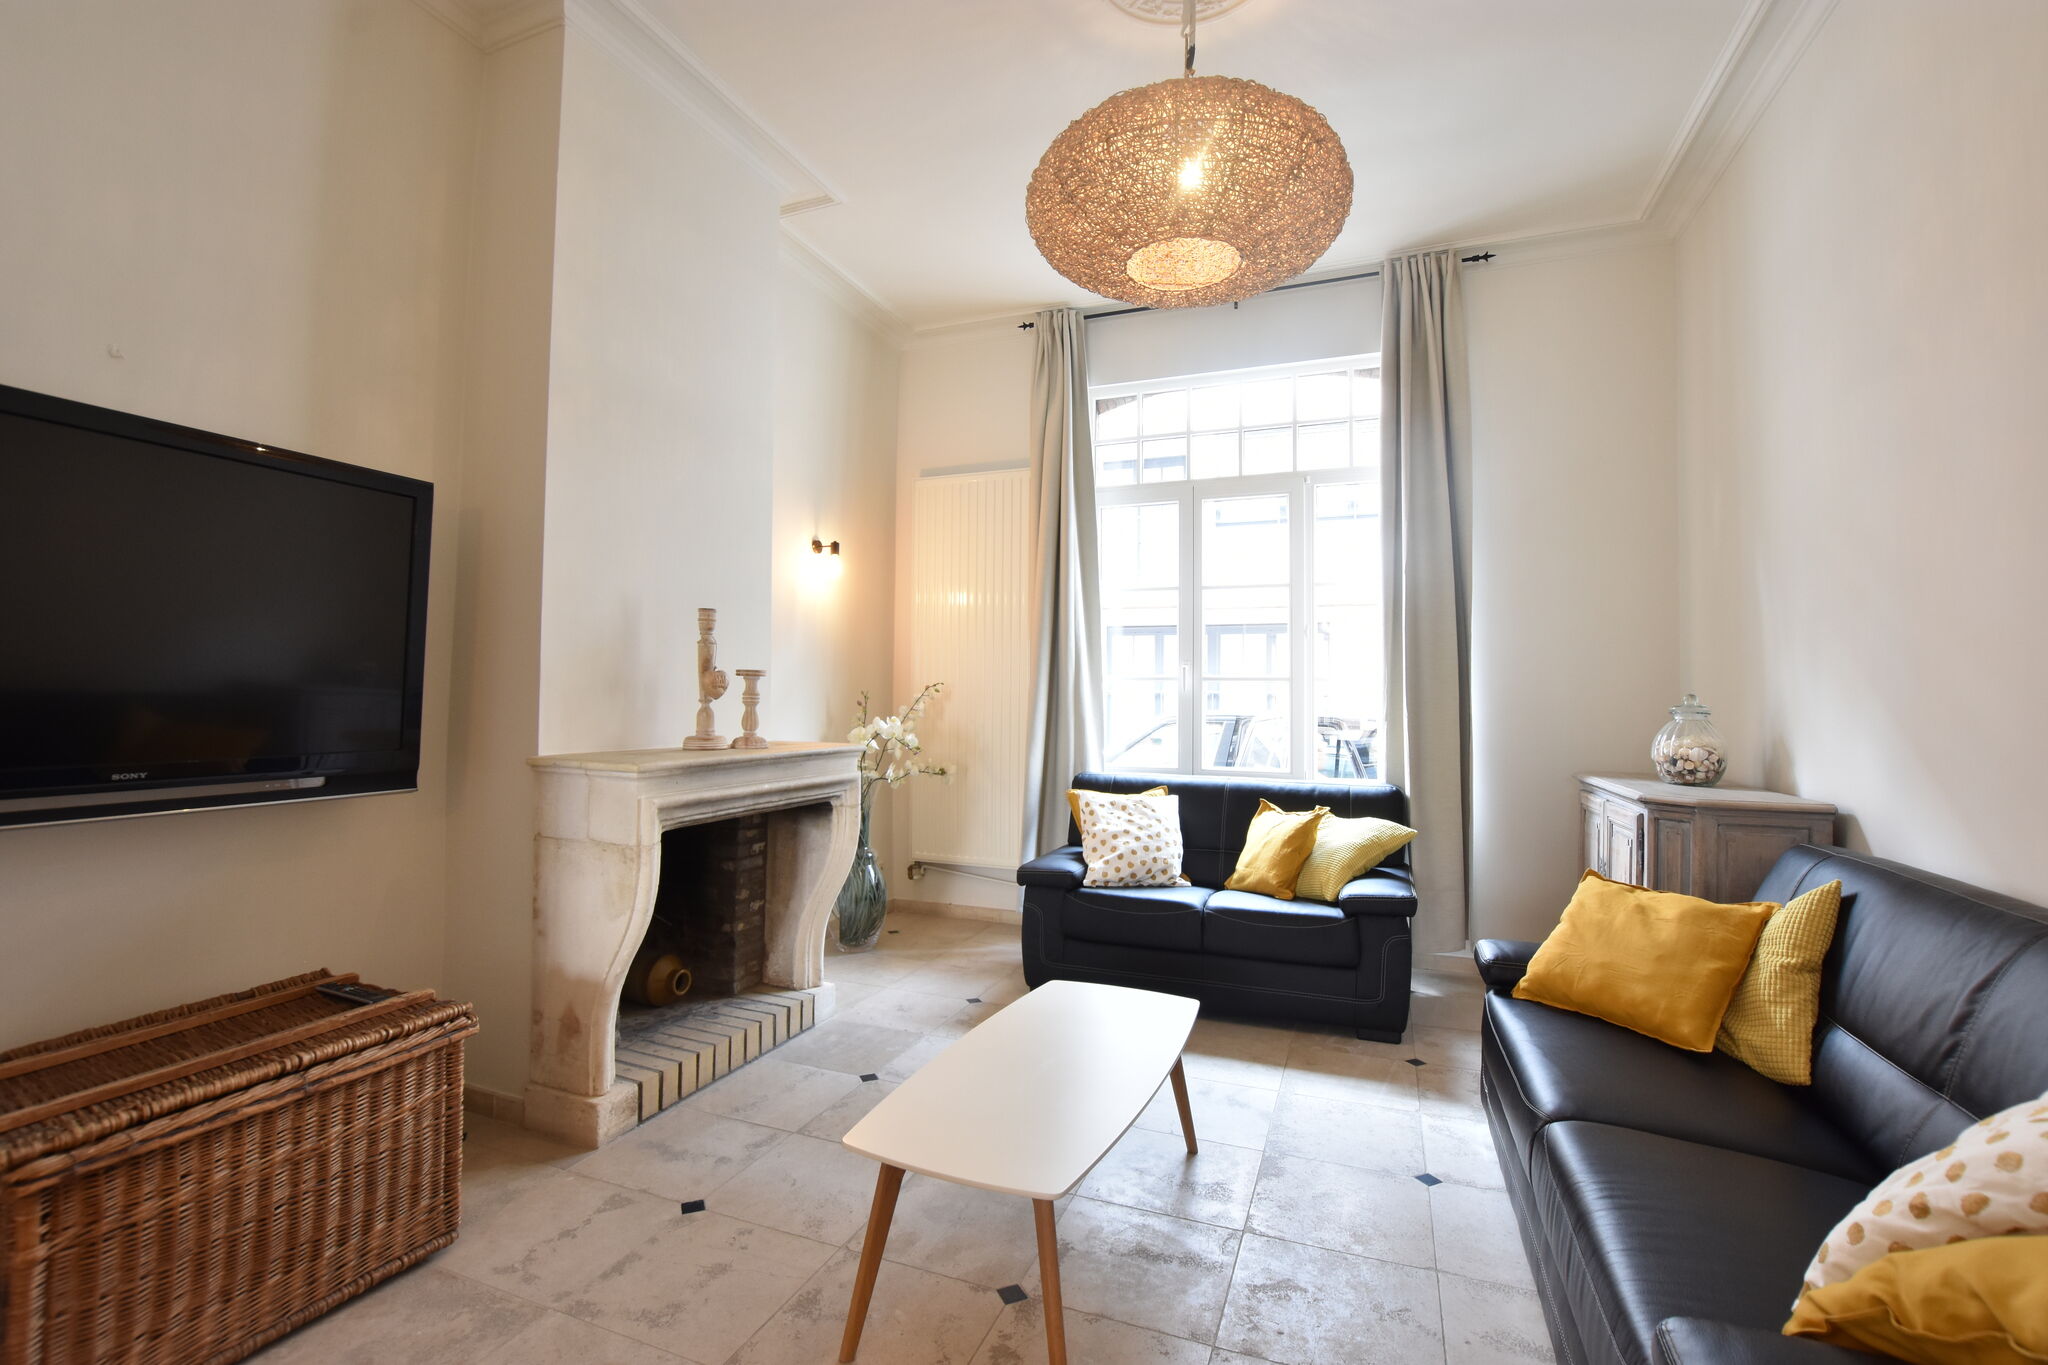 This old town house has been completely renovated